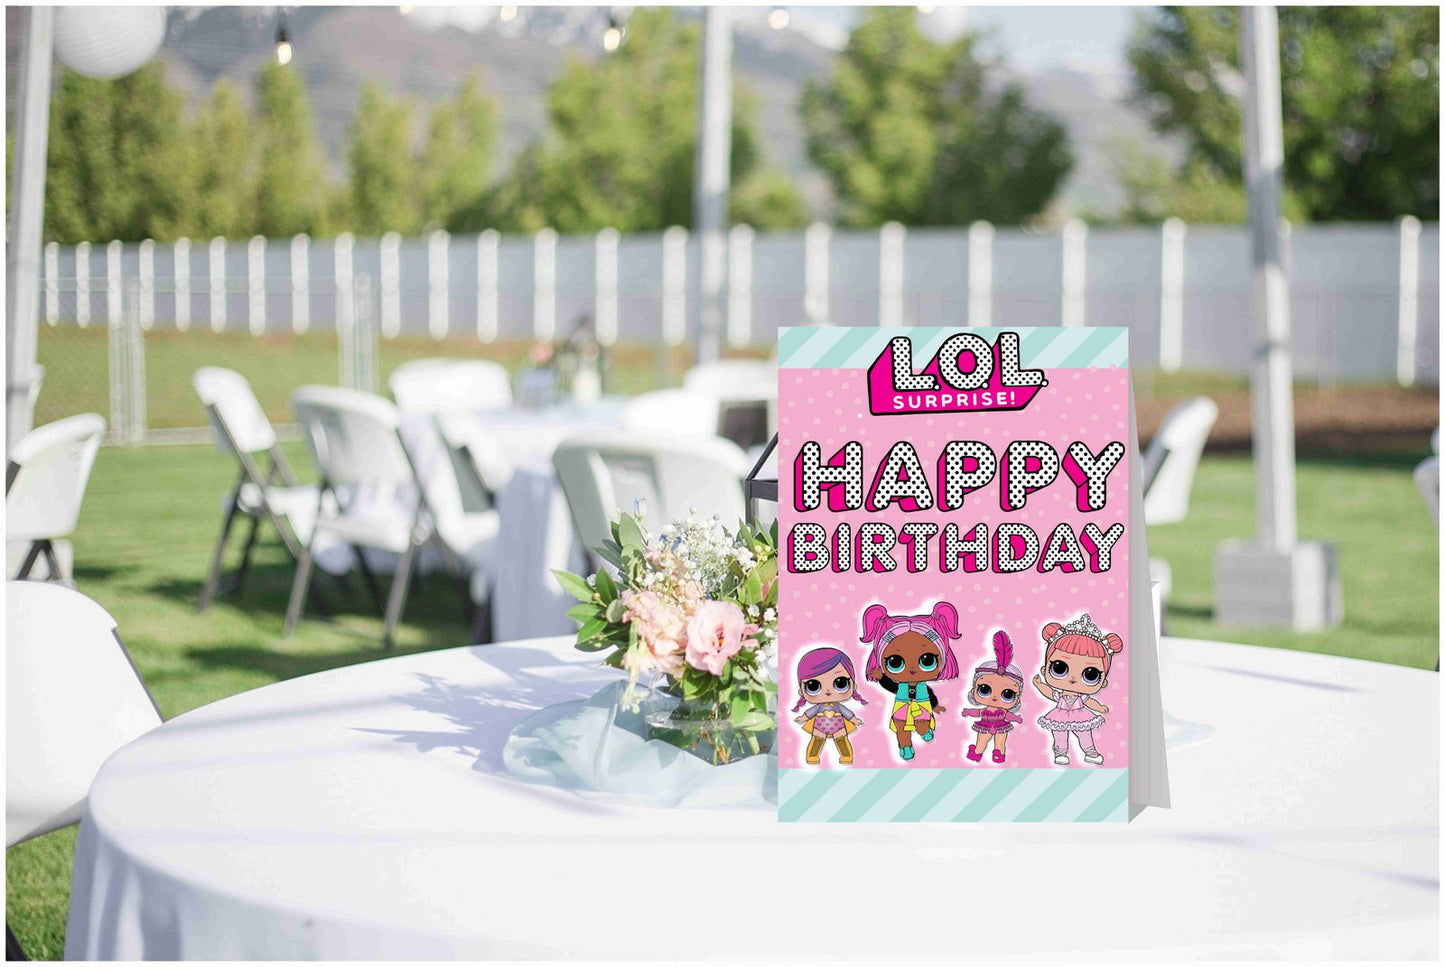 LOL Theme Cake Table and Guest Table Birthday Decoration Centerpiece Pack of 2